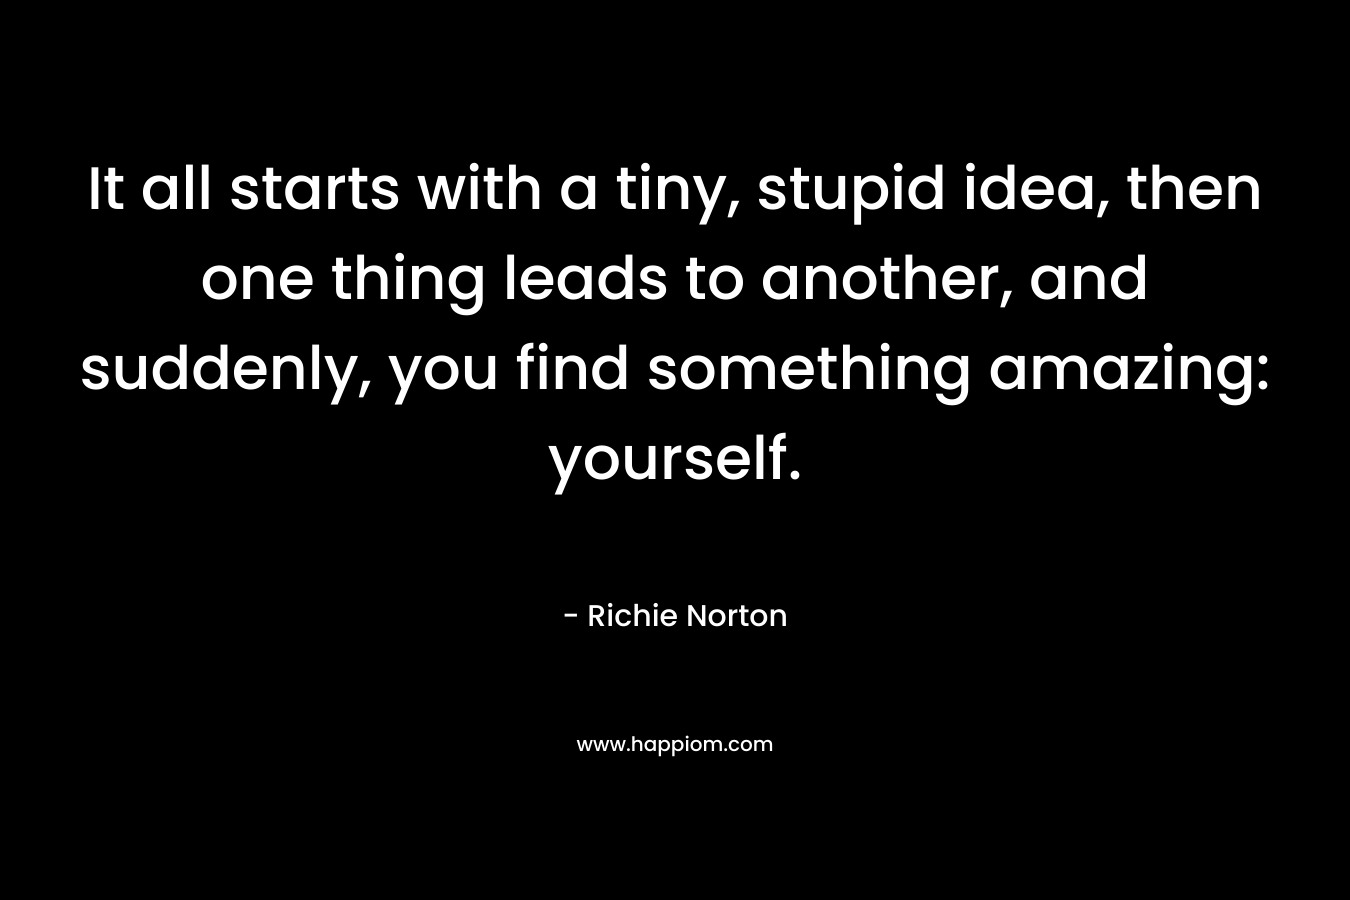 It all starts with a tiny, stupid idea, then one thing leads to another, and suddenly, you find something amazing: yourself. – Richie Norton